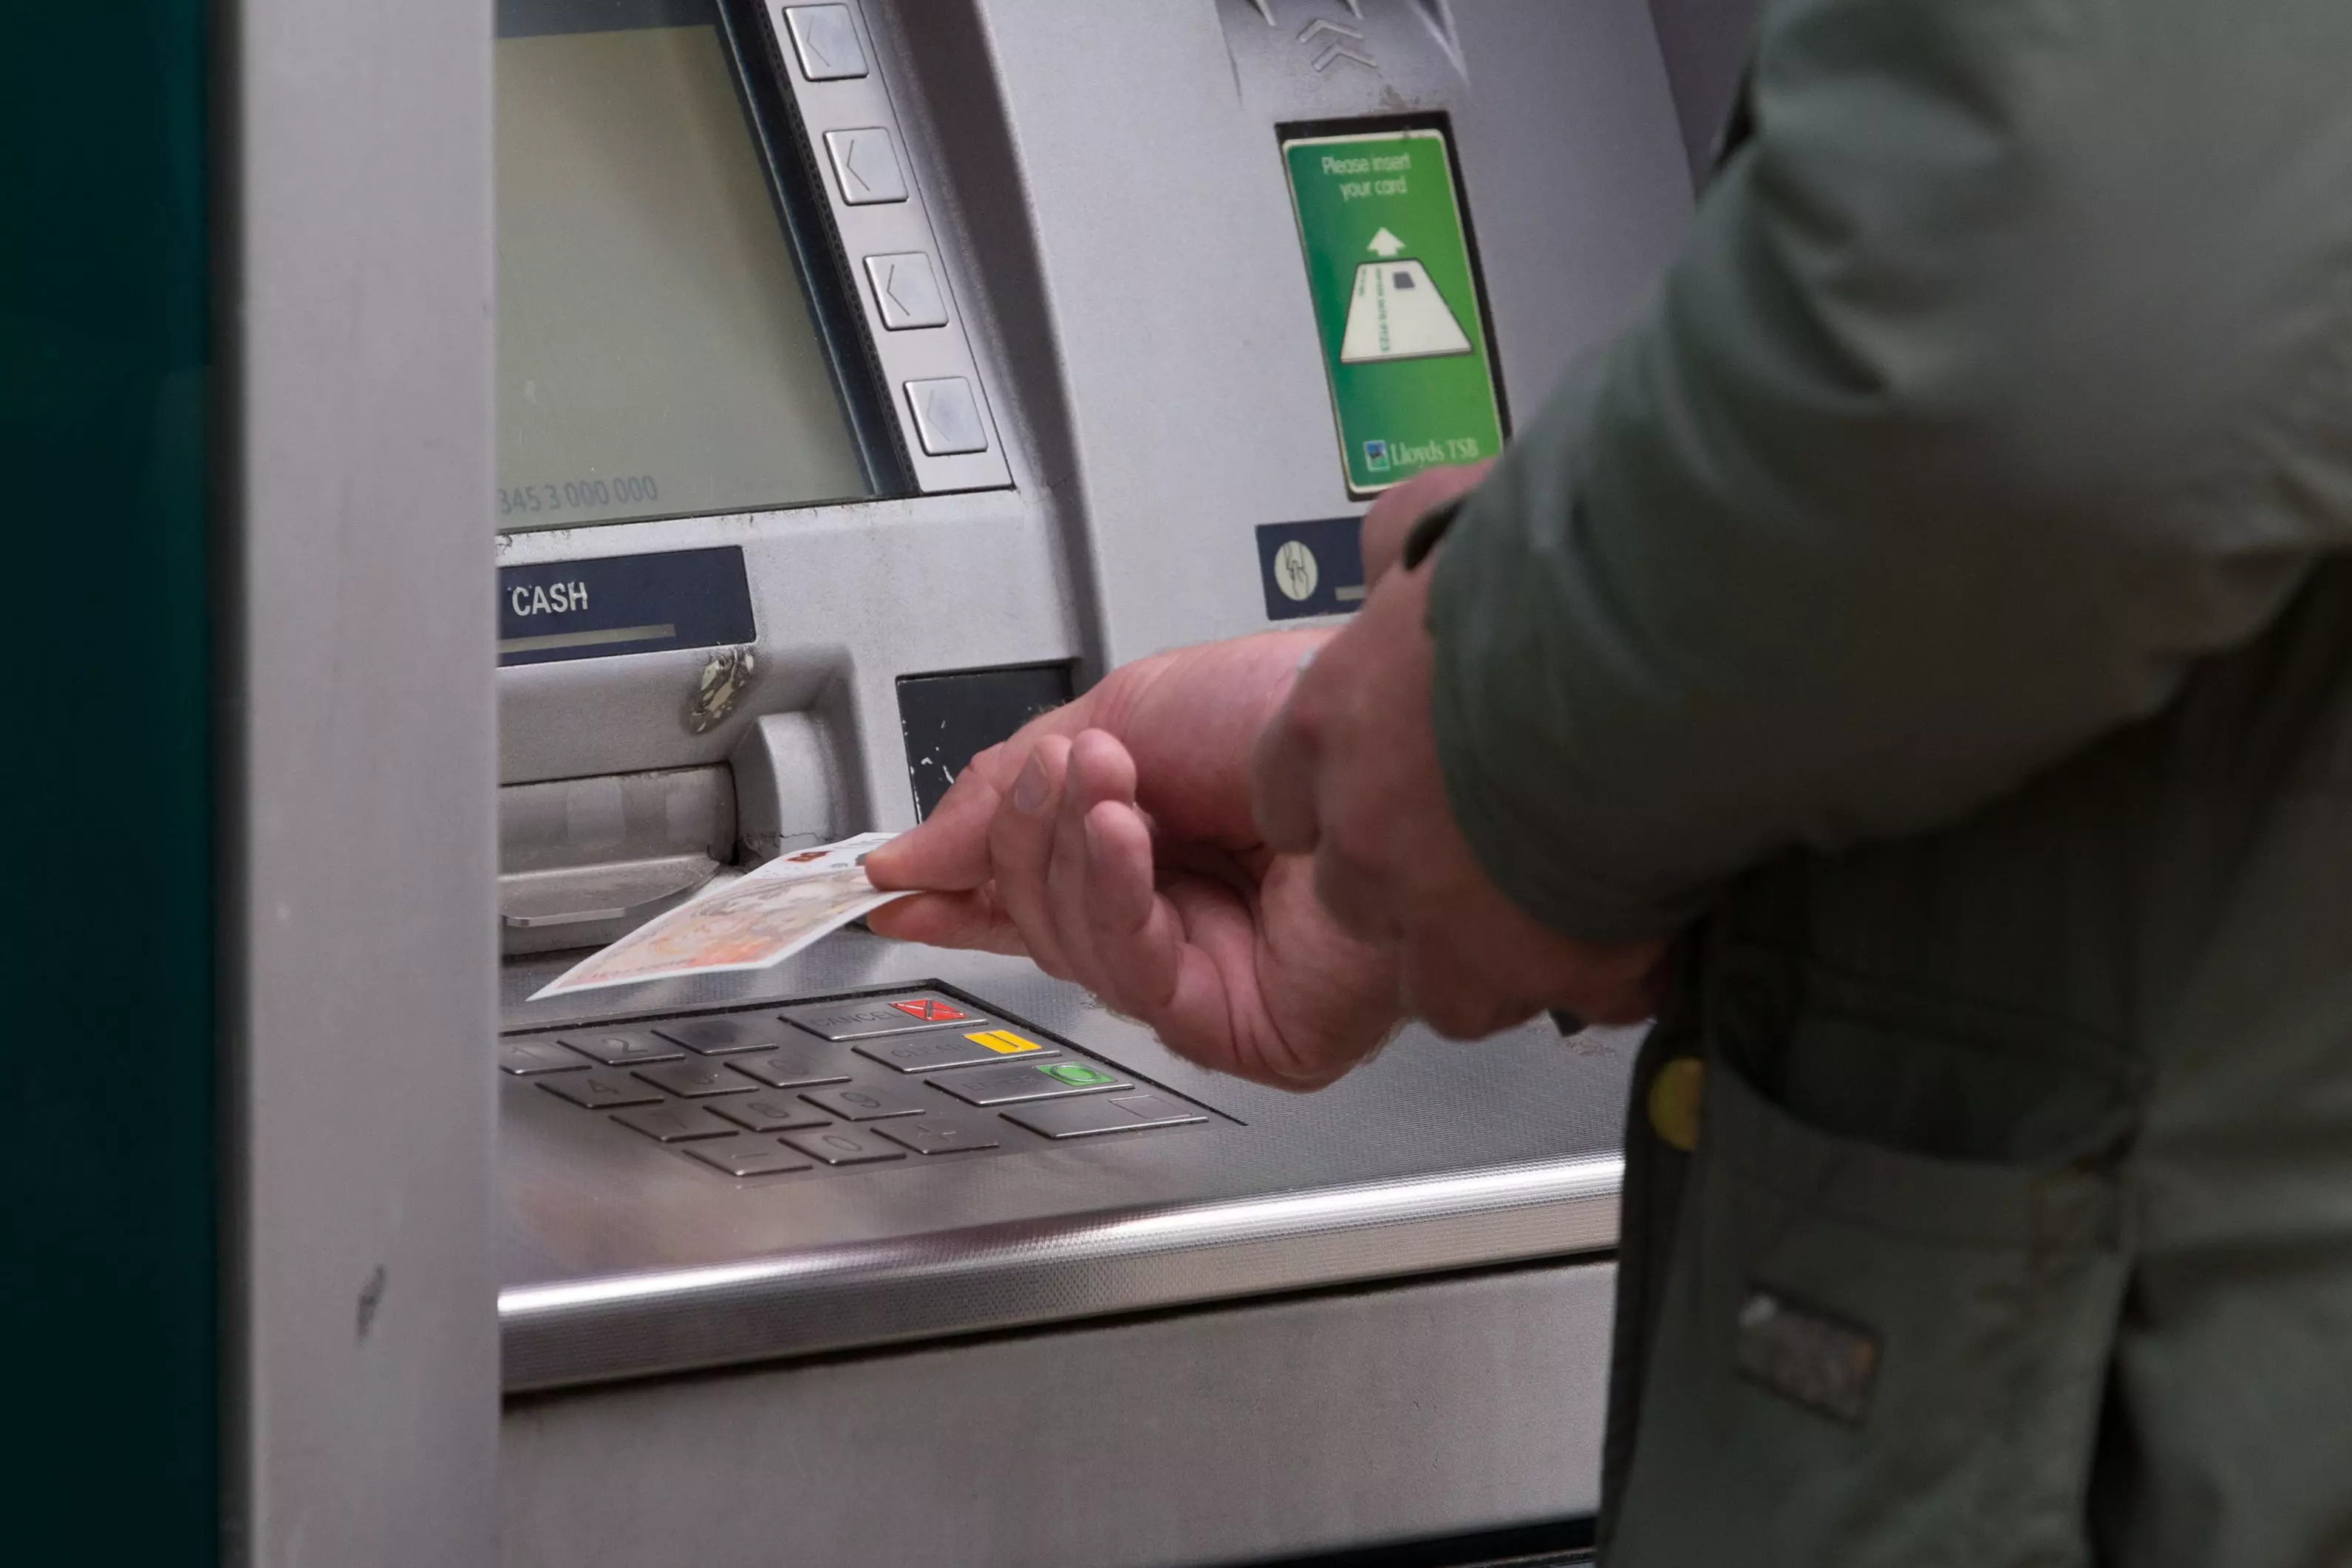 The number of free cash machines in the UK has been in decline for many years.